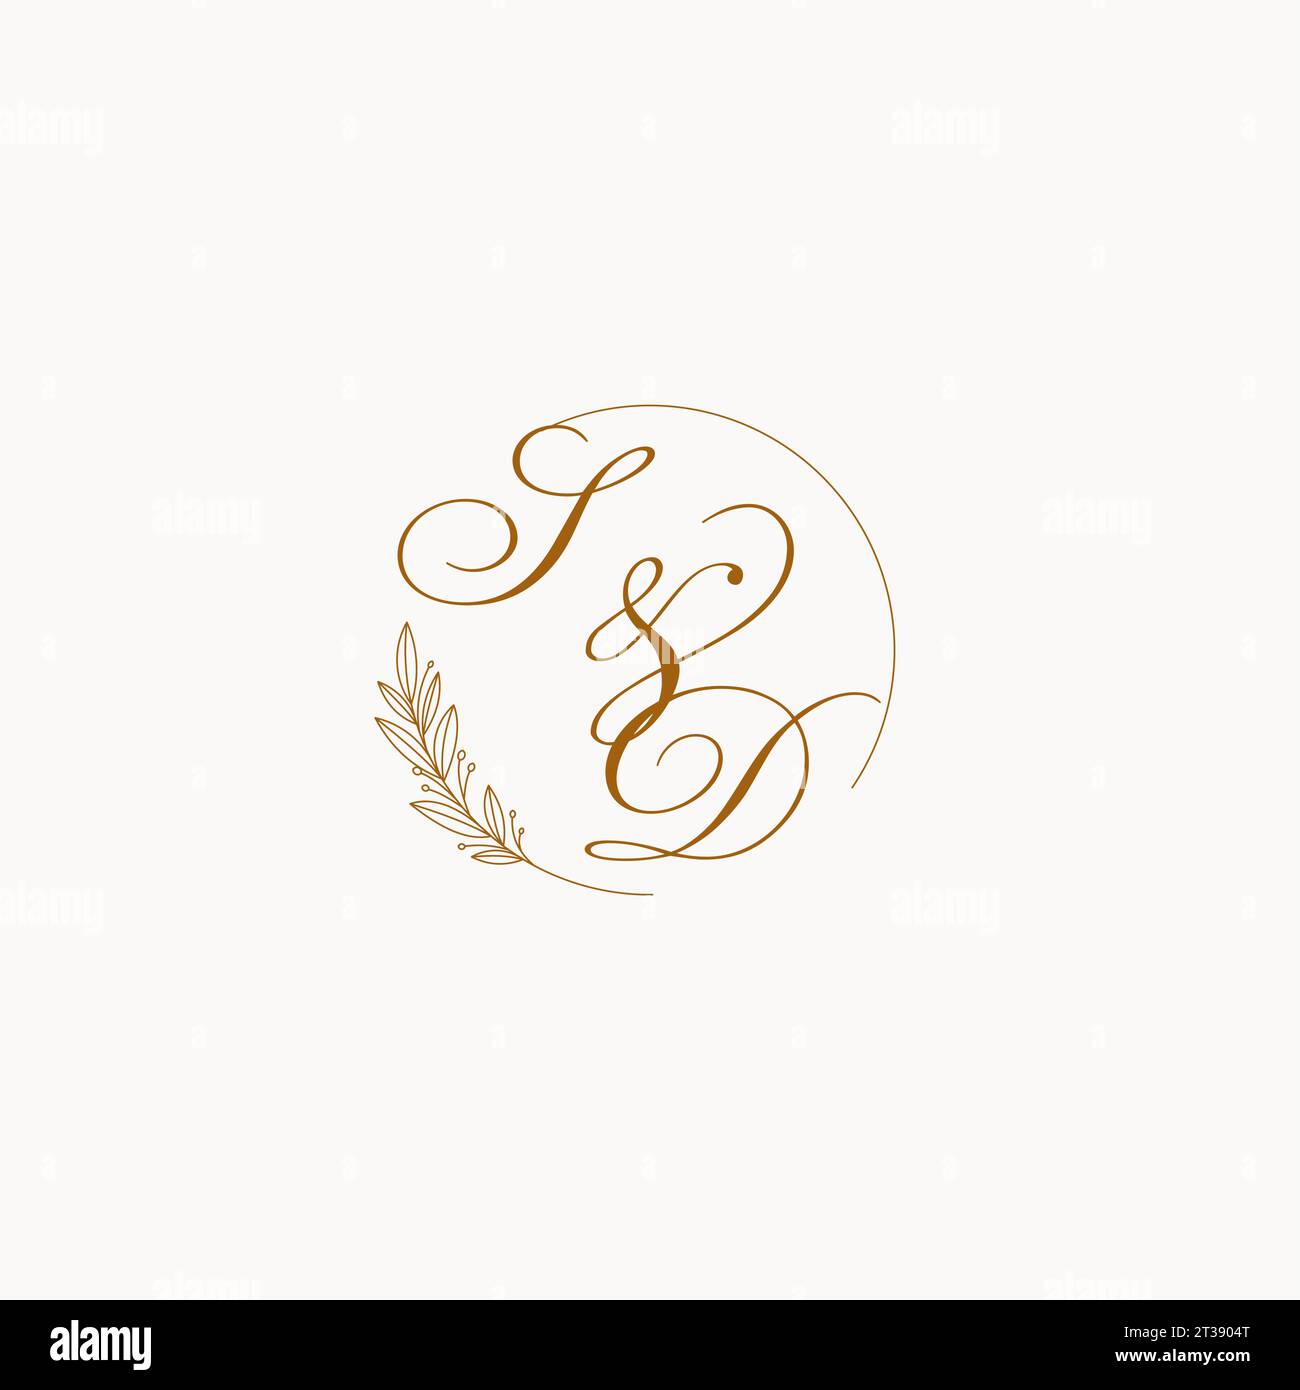 Initials SD wedding monogram logo with leaves and elegant circular lines vector graphic Stock Vector